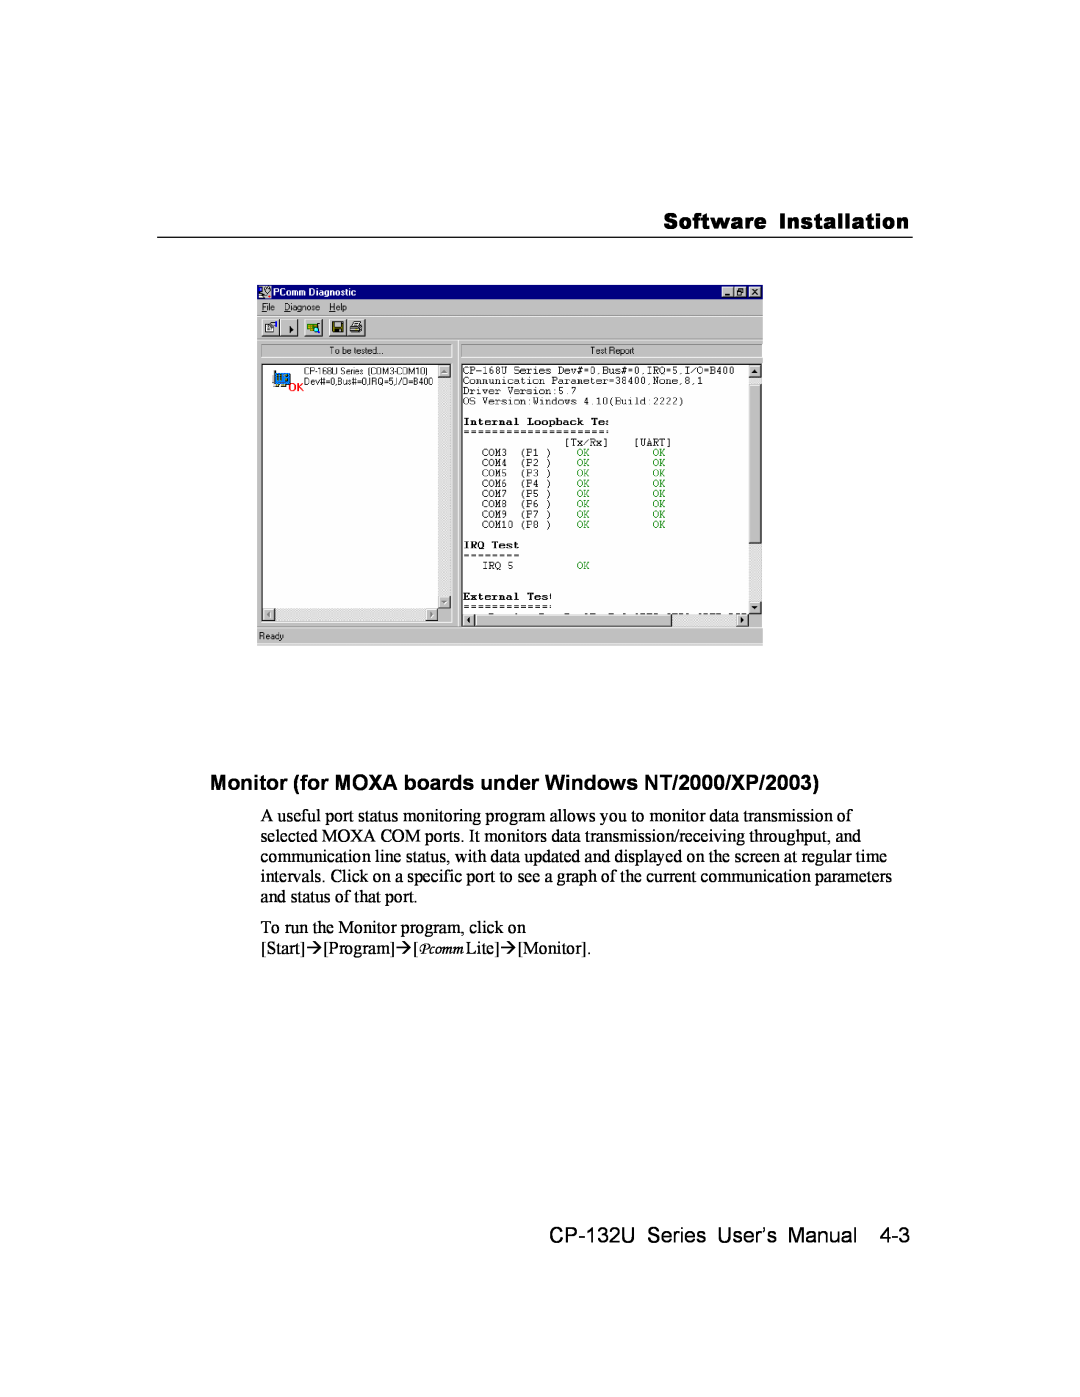 Moxa Technologies CP-132U Series user manual Monitor for MOXA boards under Windows NT/2000/XP/2003, Software Installation 